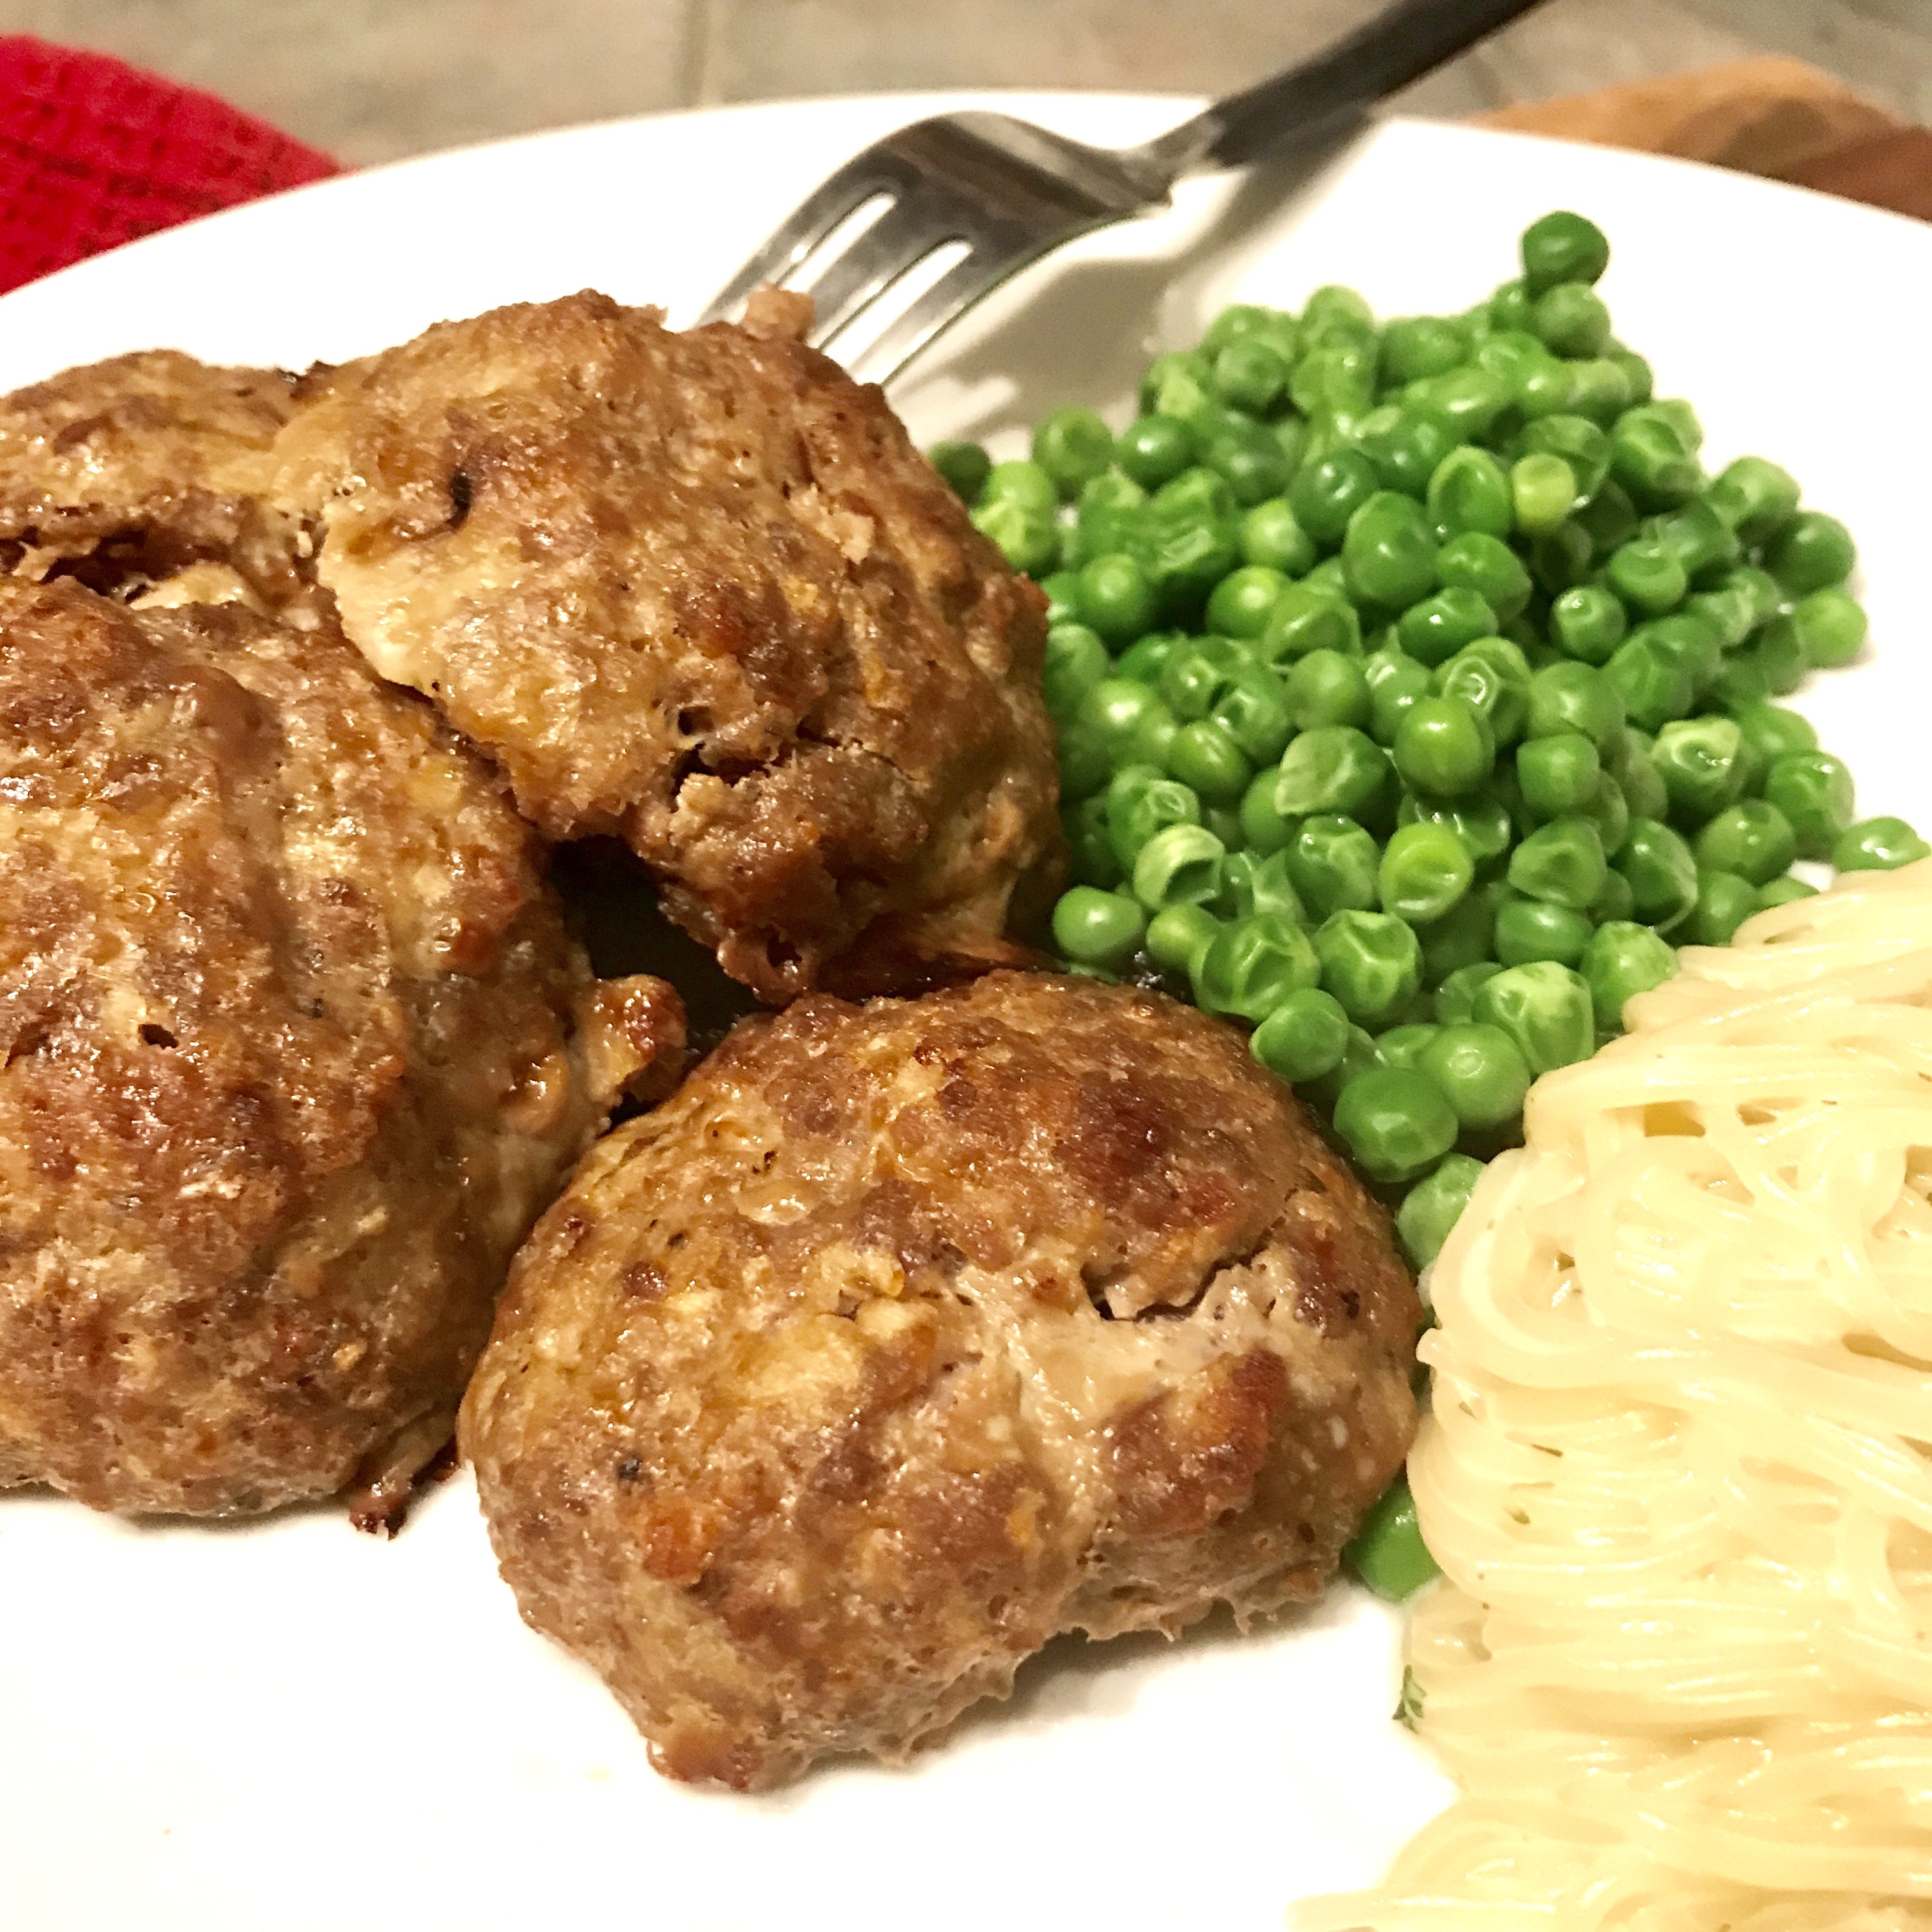 Easy, Delicious Meatballs (aka Carnivore Cookies) in Under an Hour!